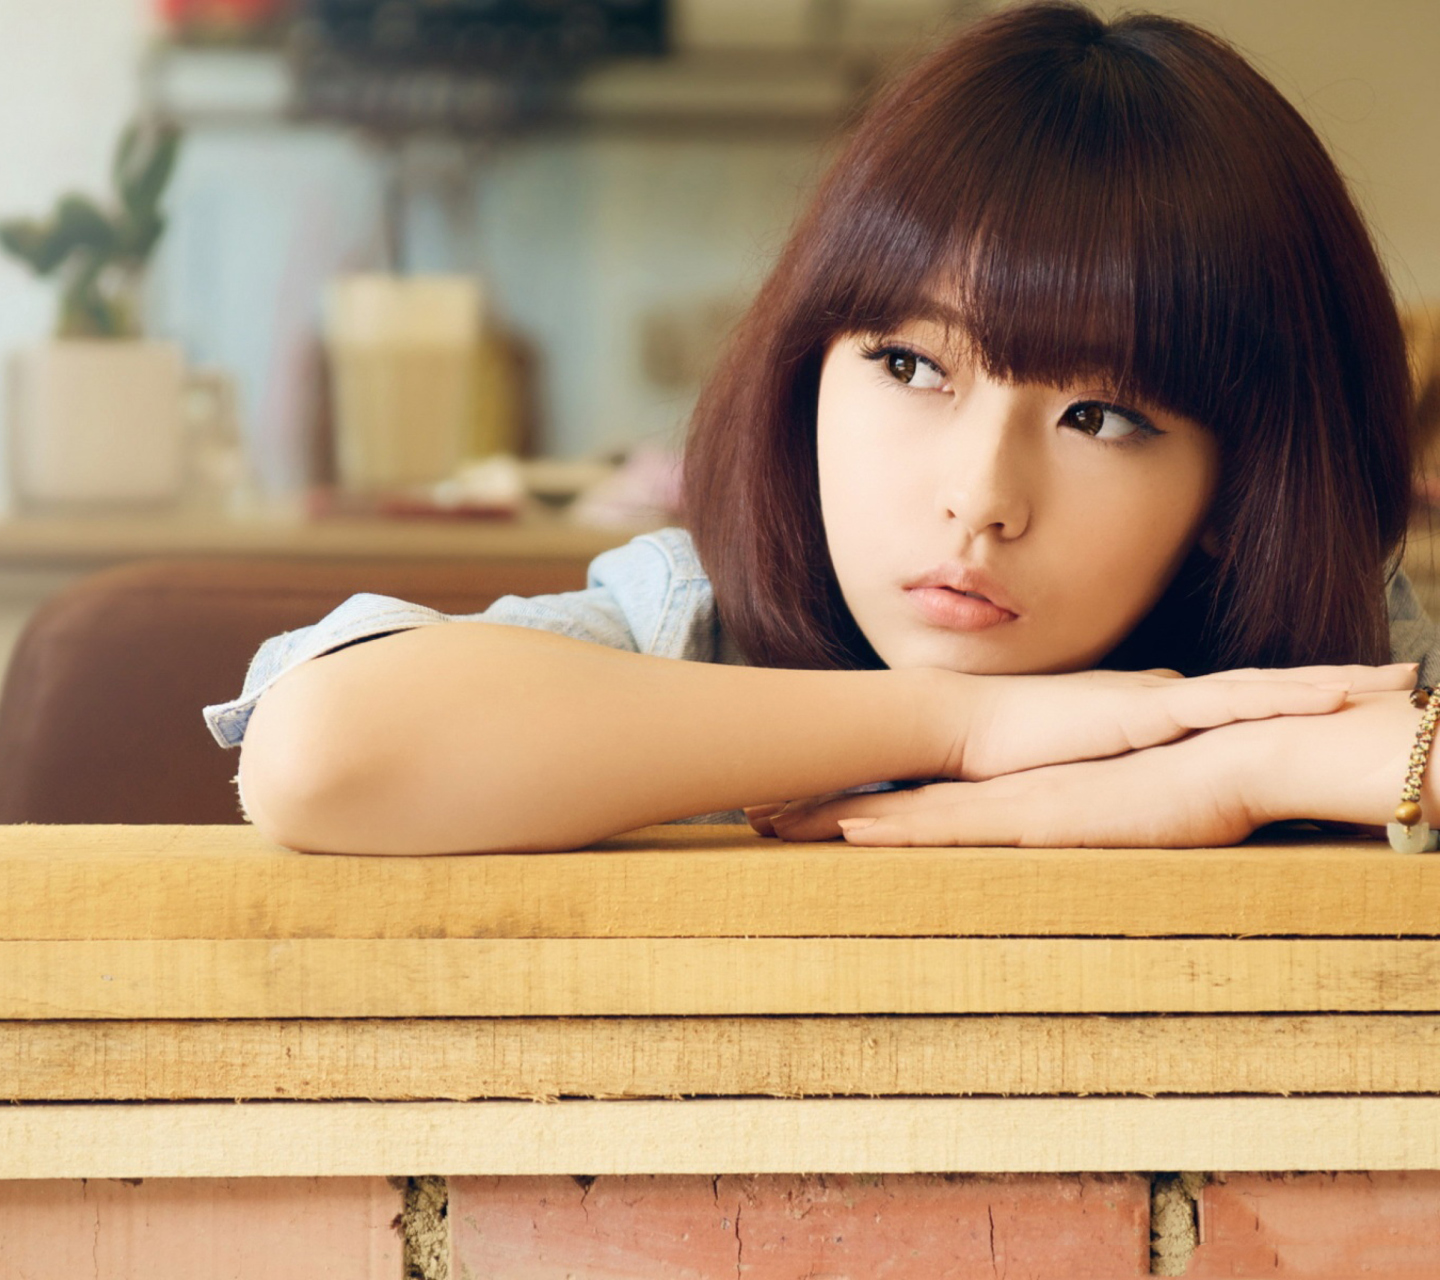 Cute Asian Girl In Thoughts wallpaper 1440x1280